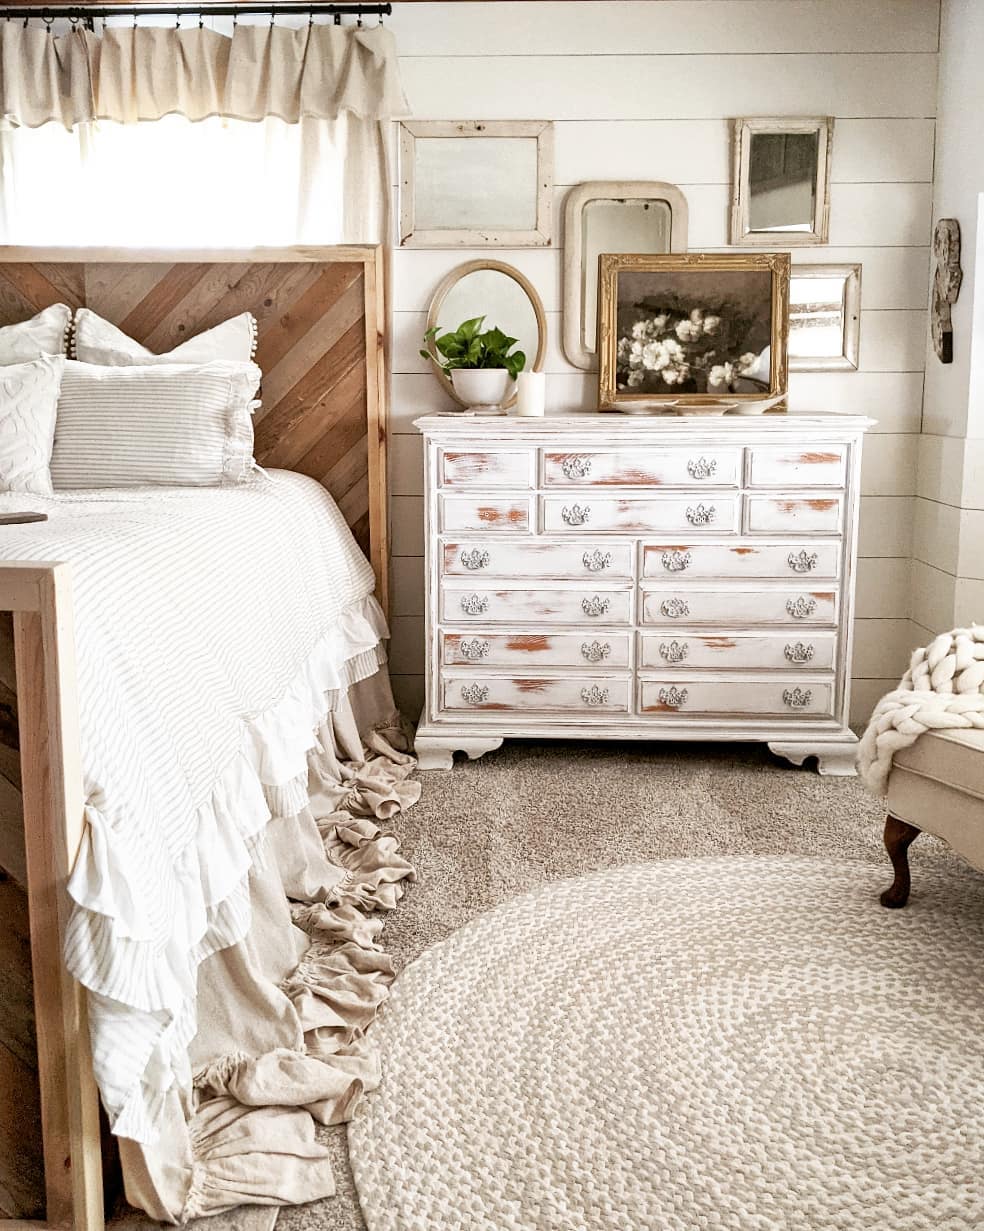 Farmhouse Bedroom with Distressed Dresser. Photo by Instagram user @downshilohroad